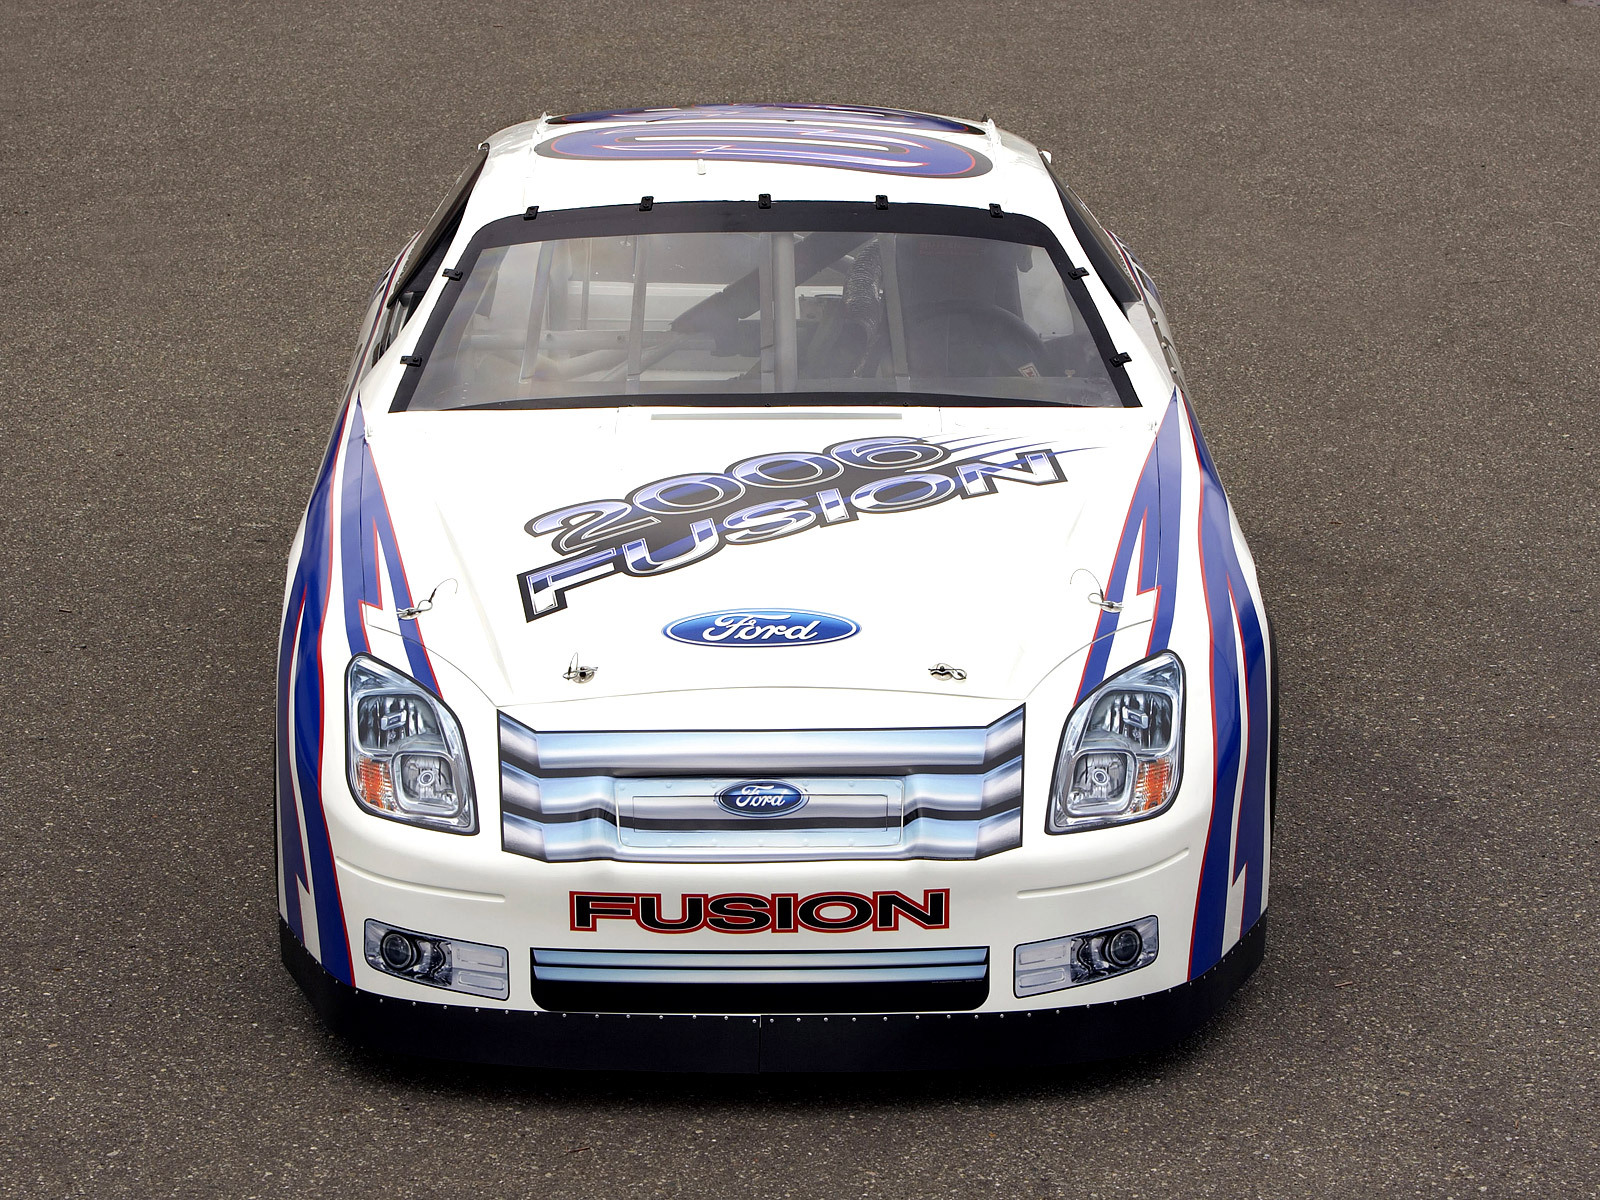 2008, Ford, Fusion, Nascar, Sprint, Cup, Race, Racing Wallpaper